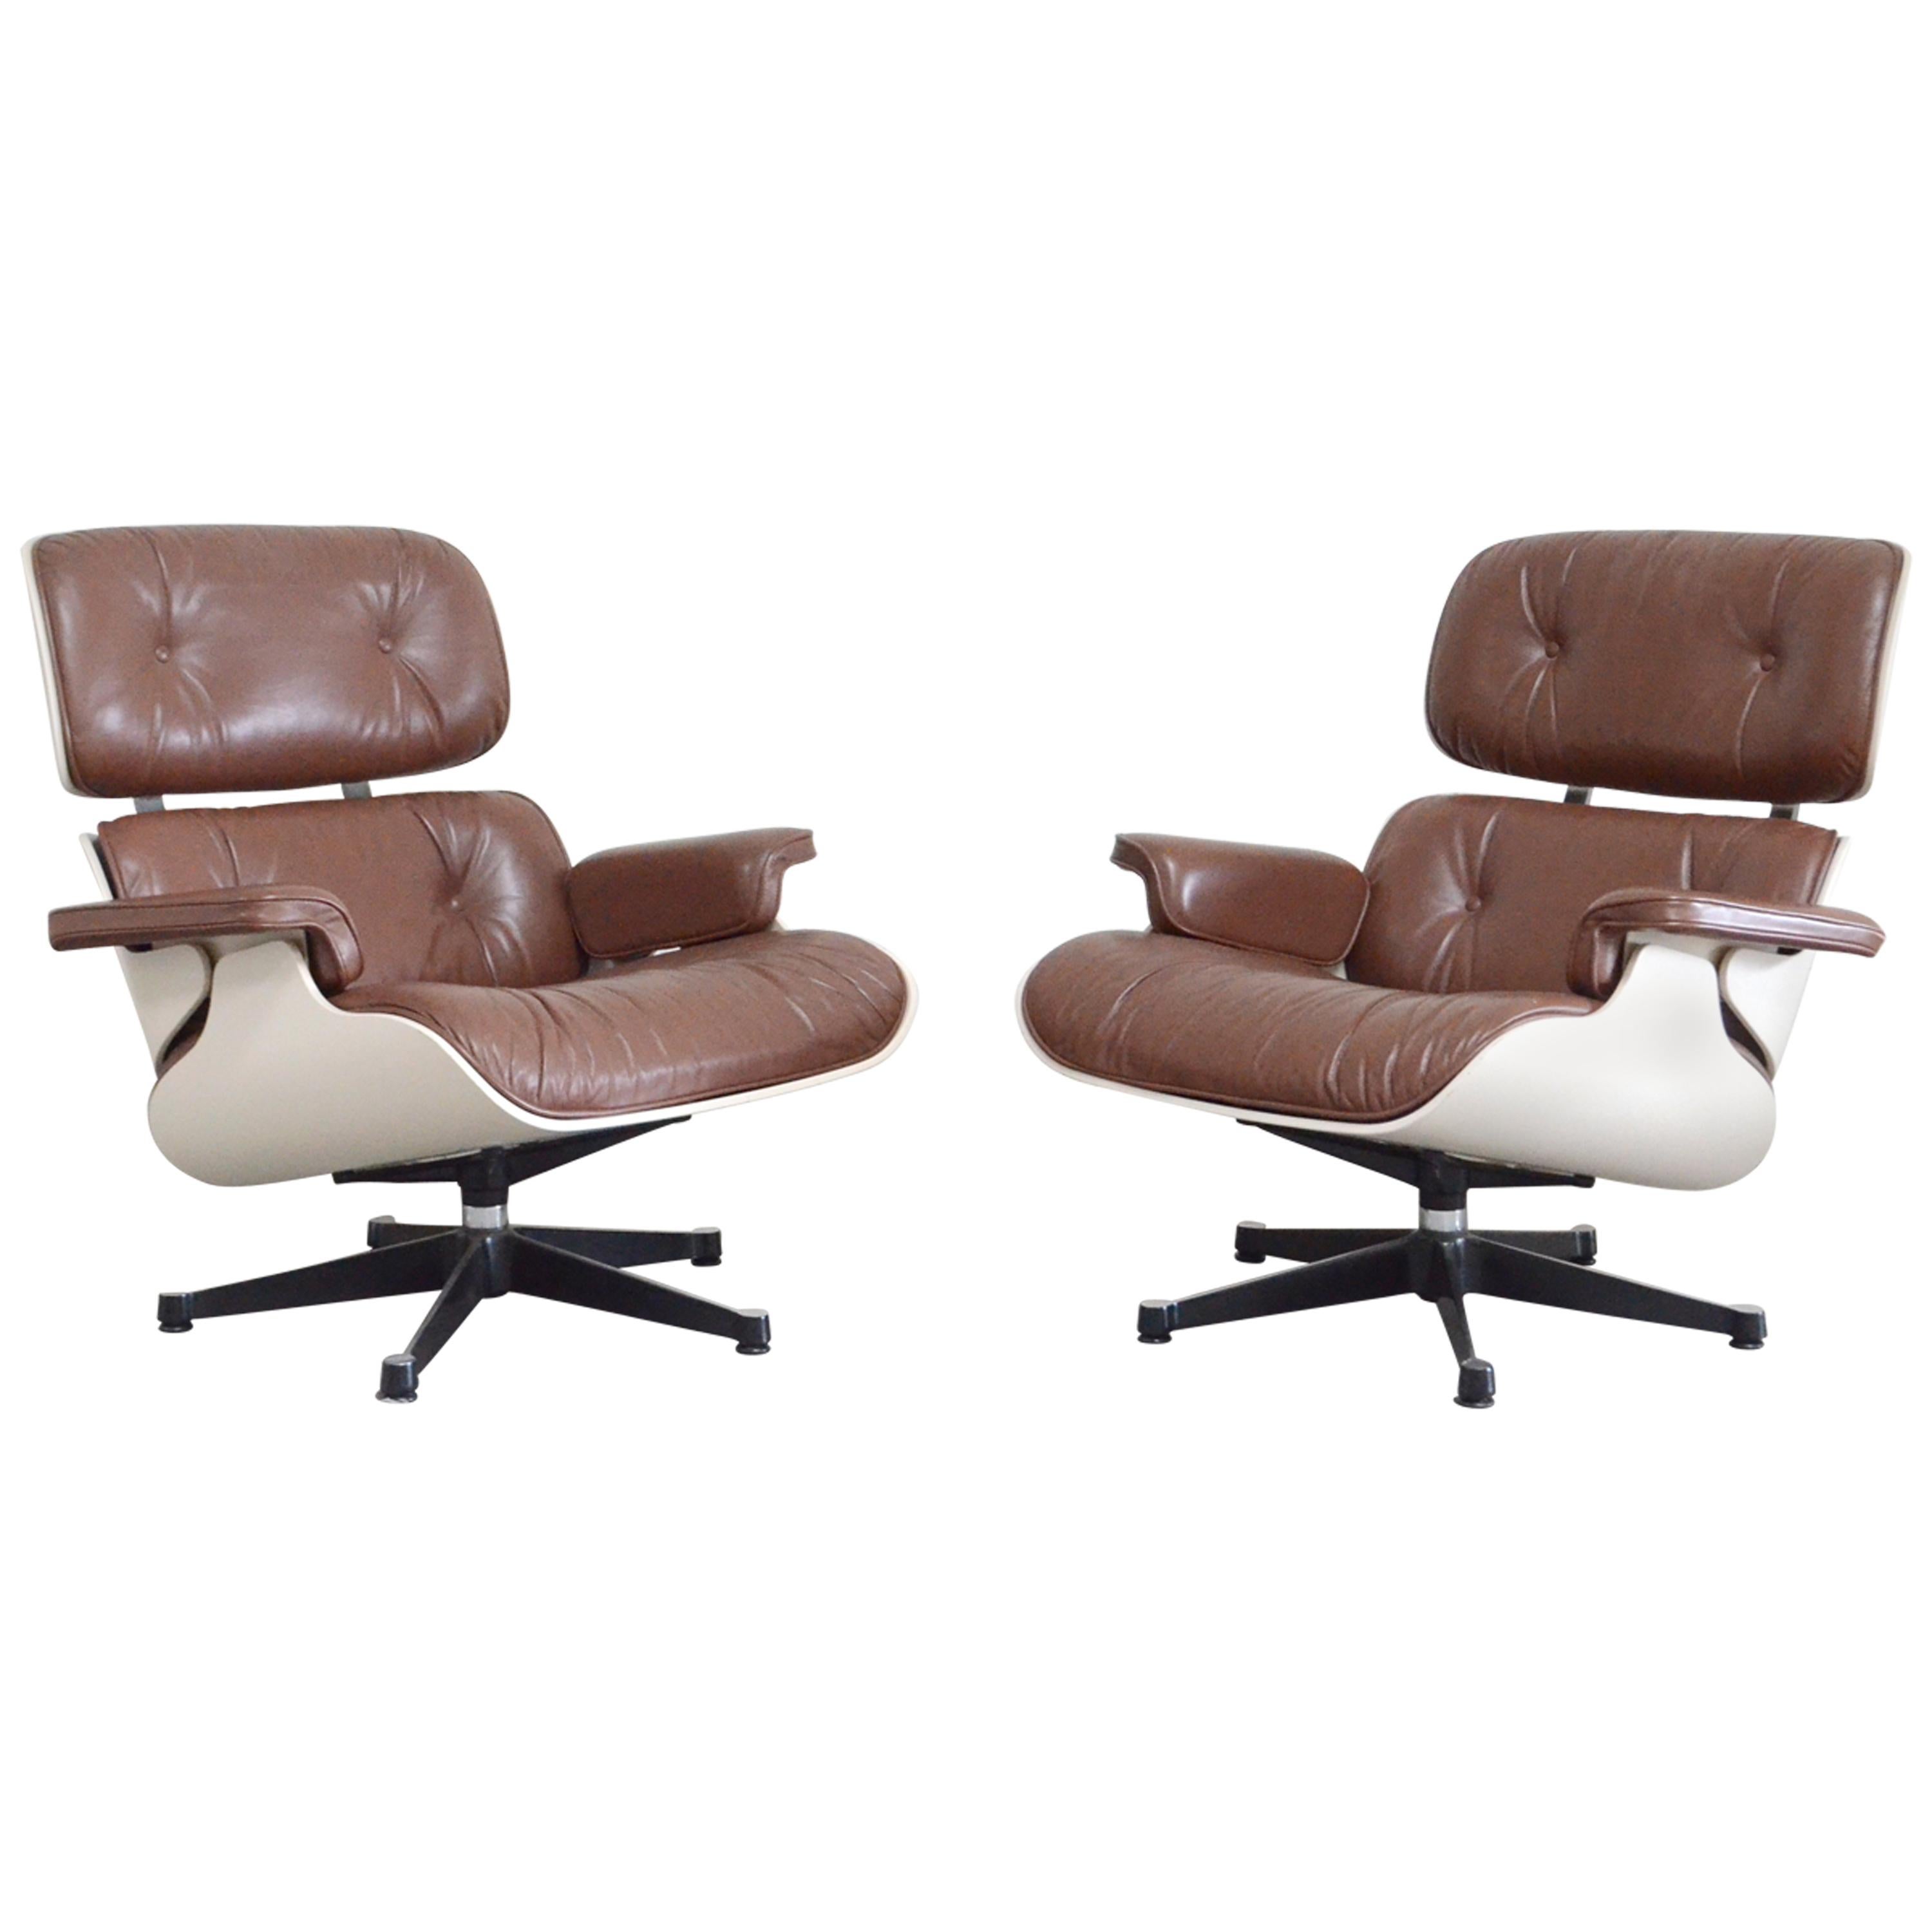 Vitra Eames Lounge Chair Cognac Brown and White Shell, Set of 2 For Sale